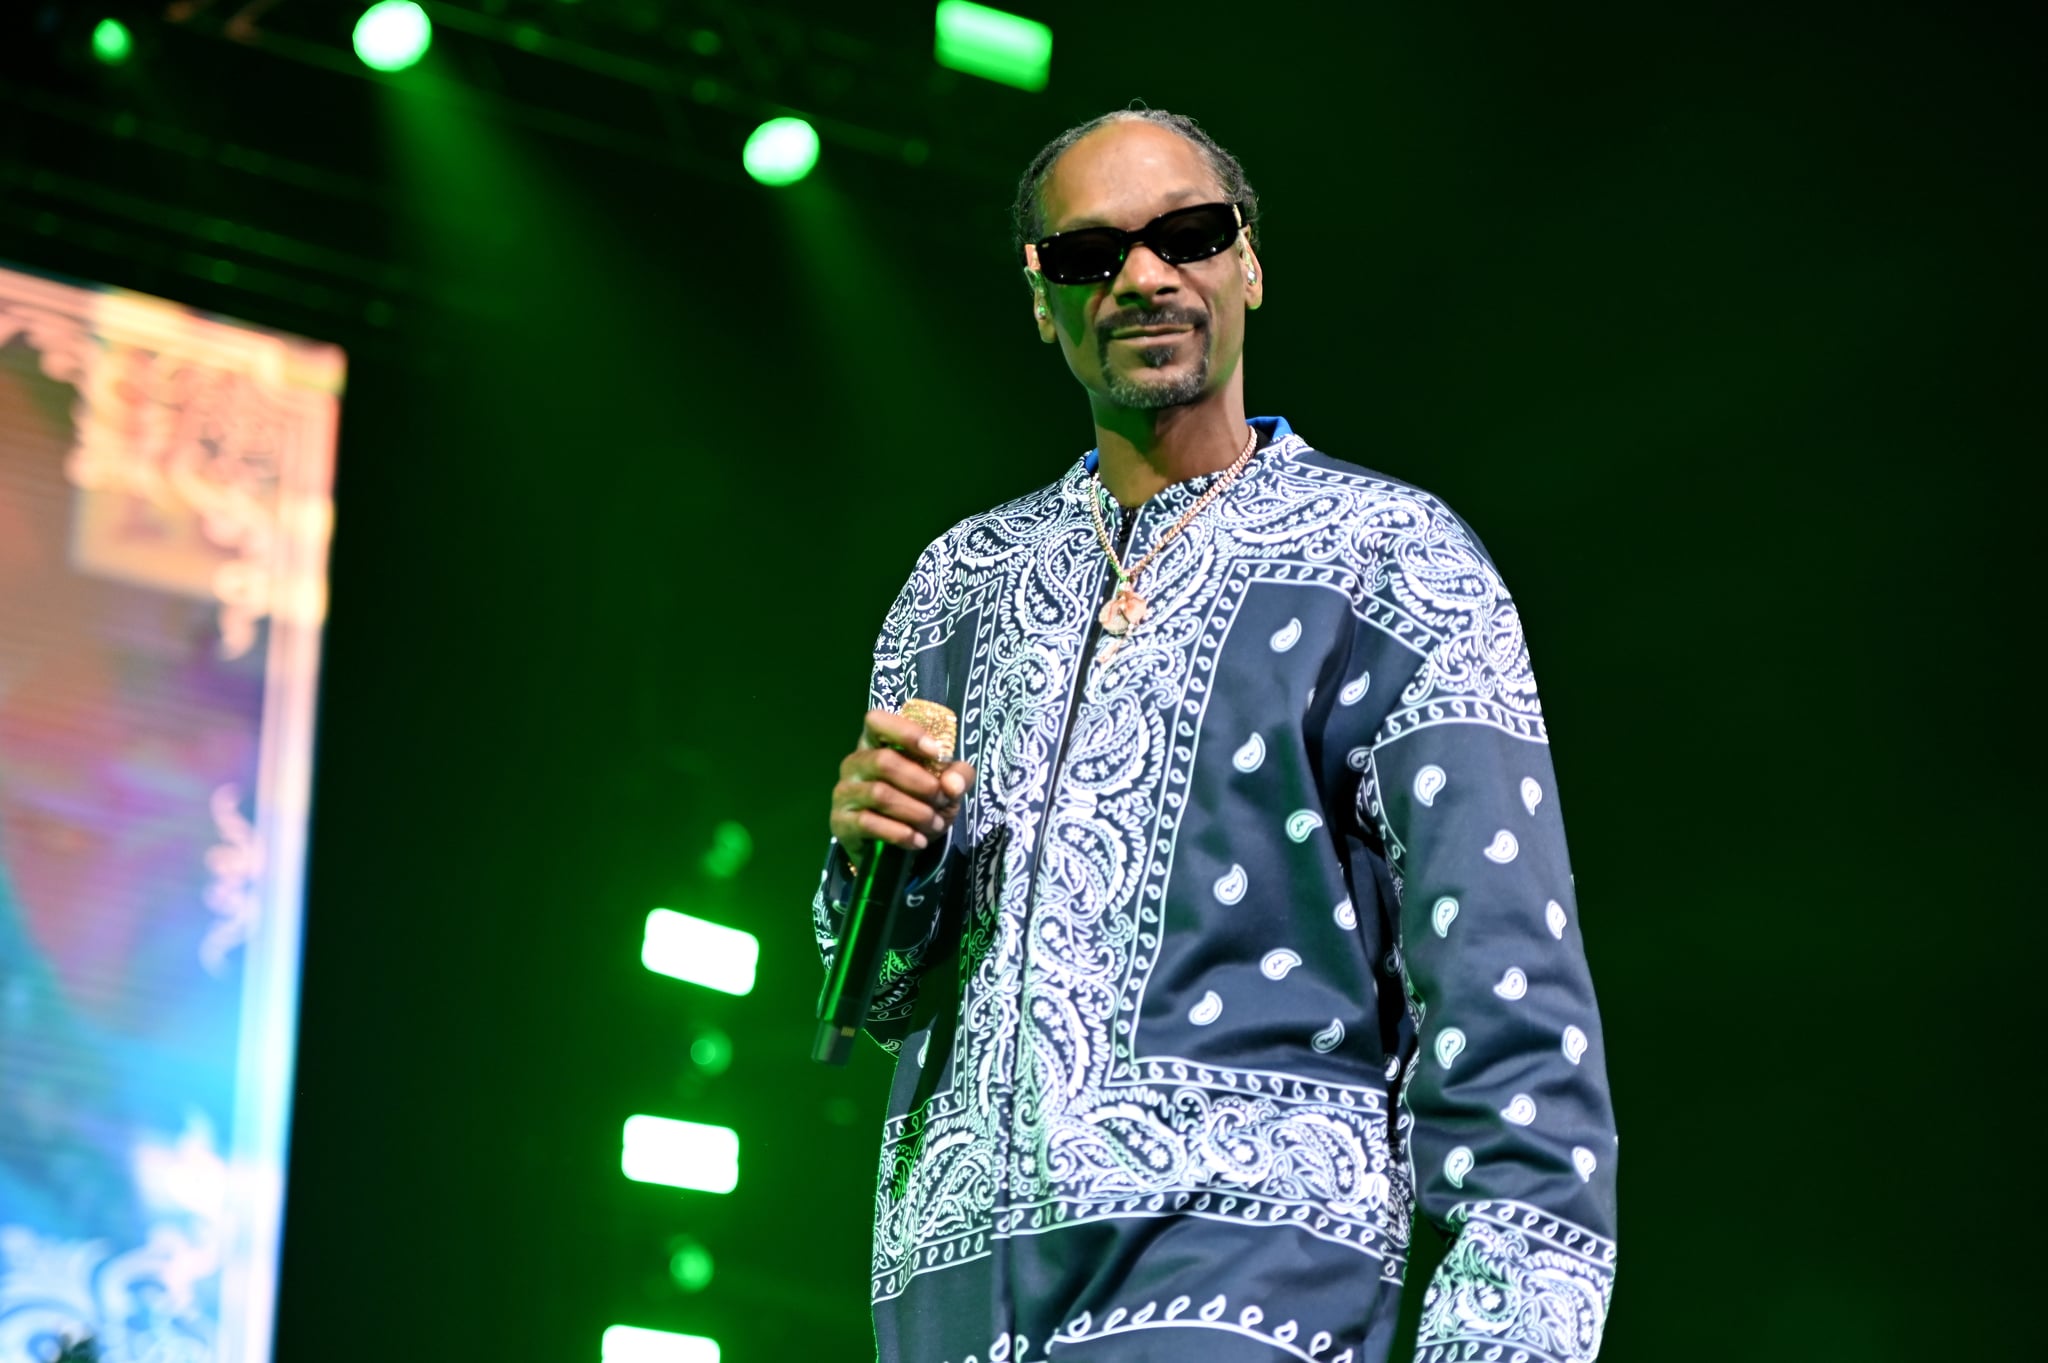 LEXINGTON, KENTUCKY - NOVEMBER 20: Snoop Dogg of hip-hop supergroup Mt. Westmore performs at Rupp Arena on November 20, 2021 in Lexington, Kentucky. (Photo by Stephen J. Cohen/Getty Images)